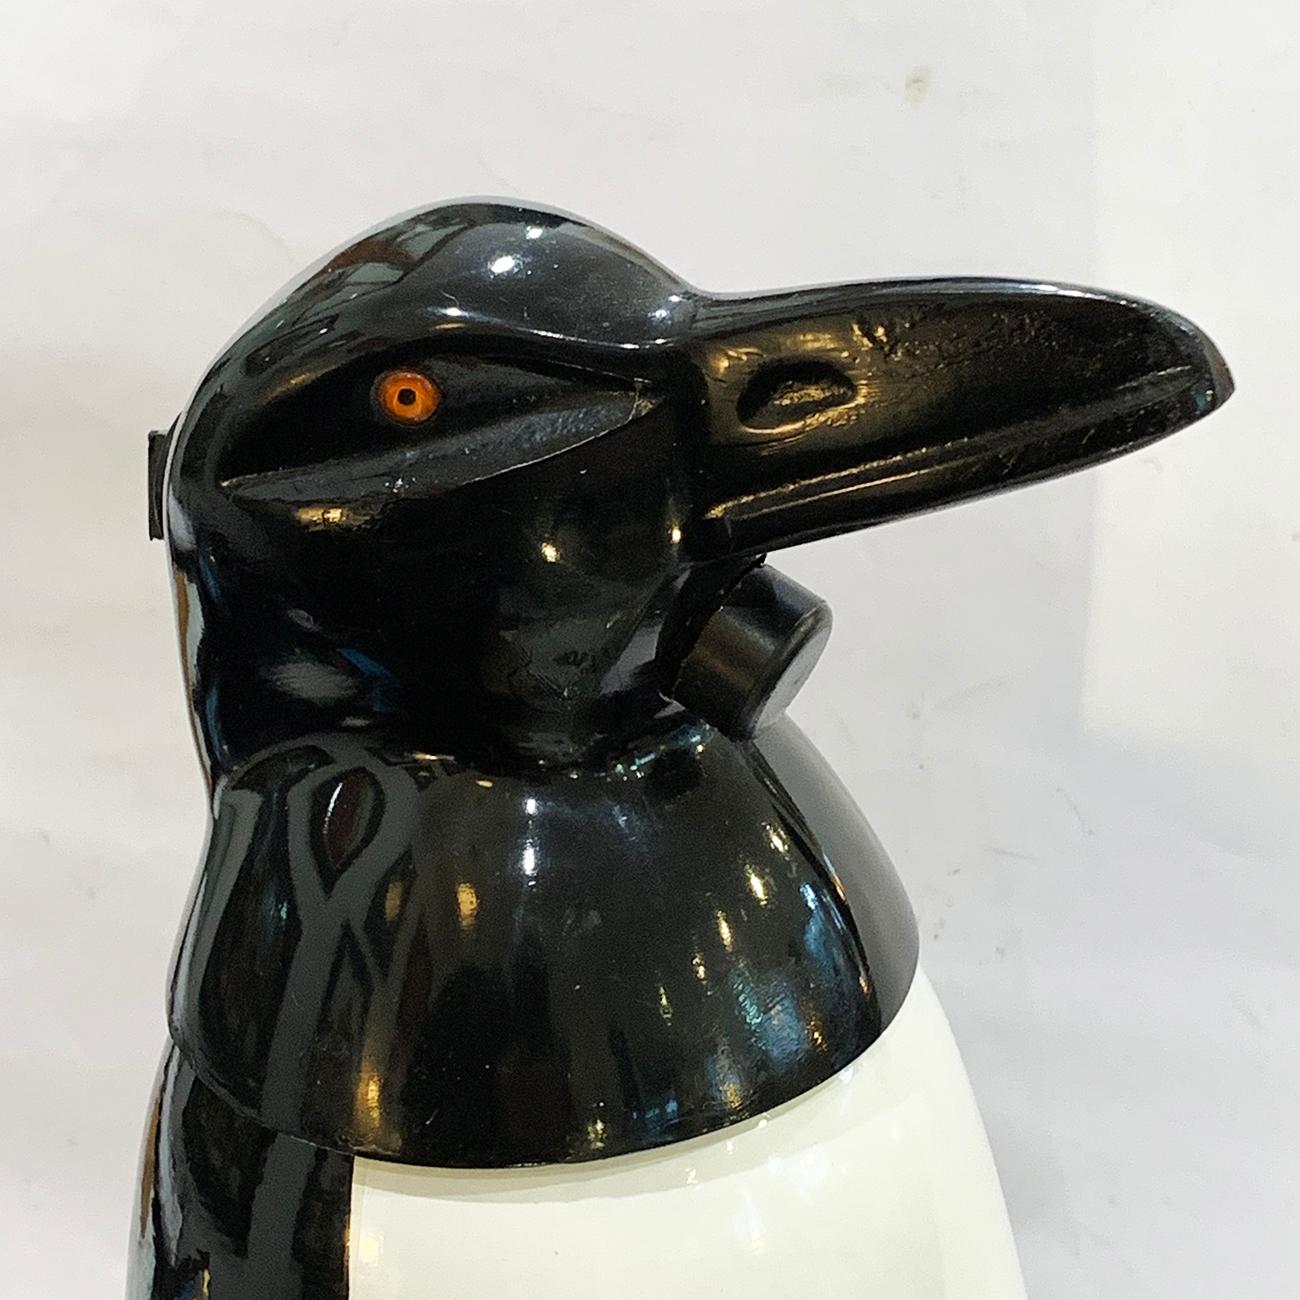 Art Deco Russian penguin soda syphon, in black and white enamel to the pressure welded cylinder, white Bakelite feet, glass eyes set to cast stainless steel head with black enamel. The throat has a button at, that when pressed, releases the soda